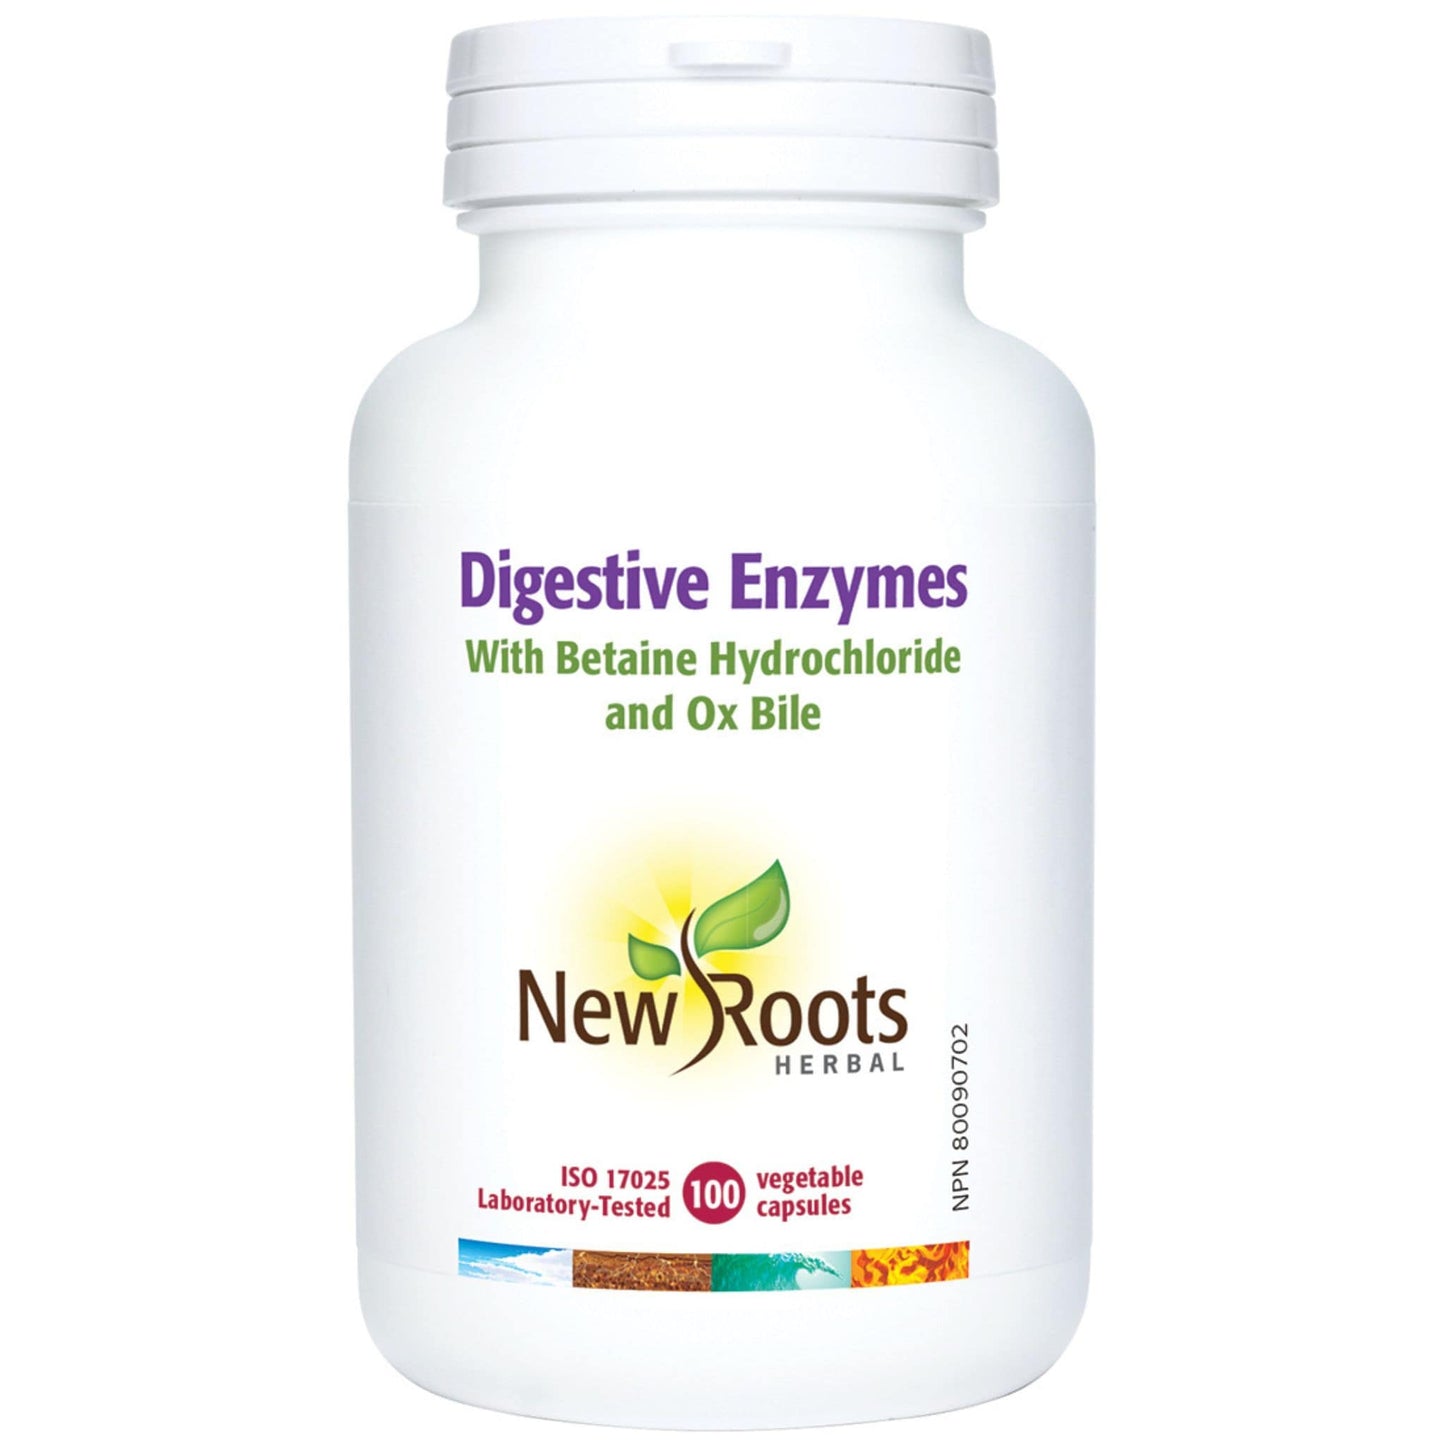 New Roots Digestive Enzymes with Betaine and Ox Bile, 100 Capsules